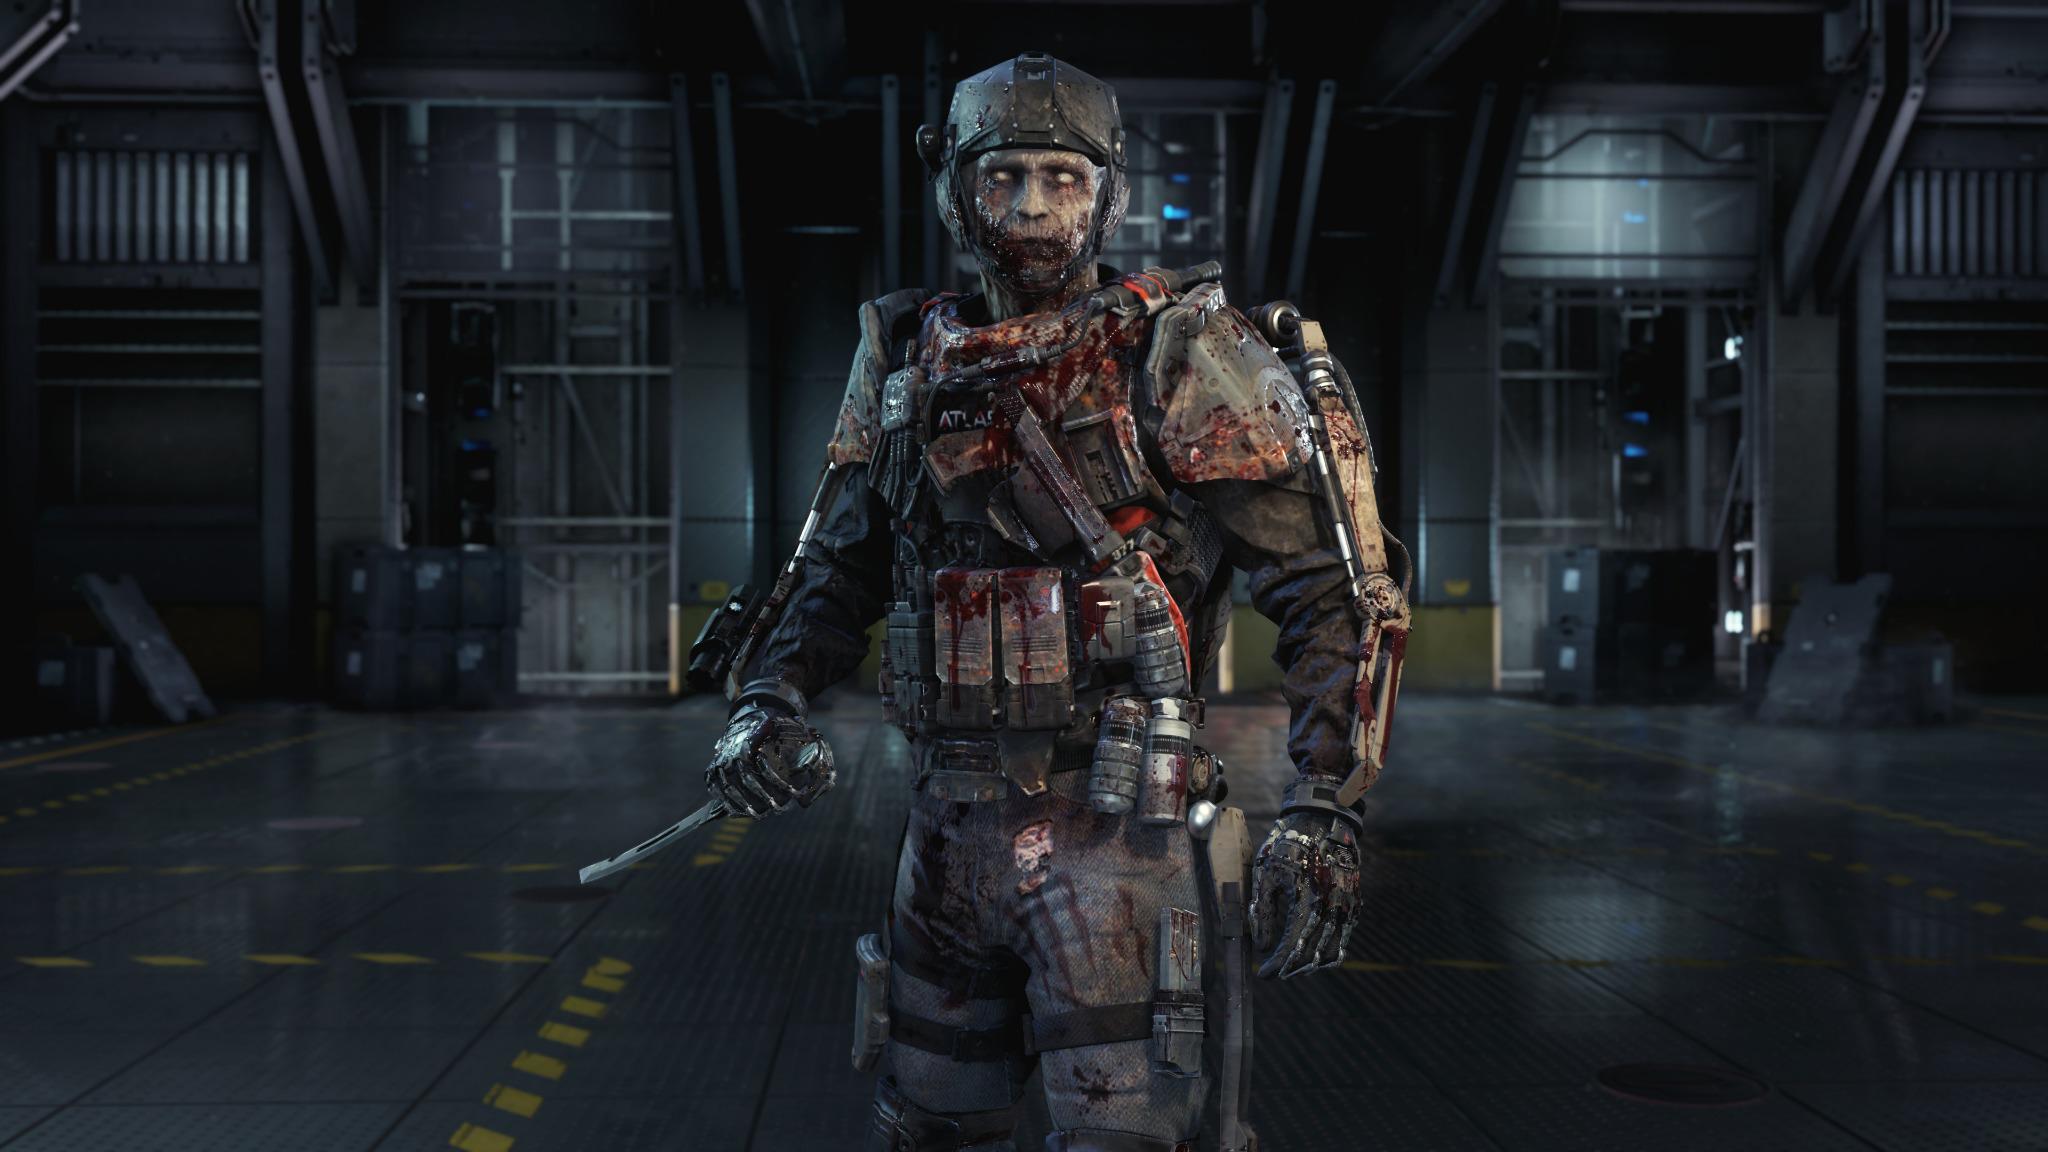 Sledgehammer Games On Twitter Did You Know Play Exo Survival In Callofduty Advancedwarfare To Unlock The Full Exo Zombies Character Gear Set Http T Co Vgow5sqijj